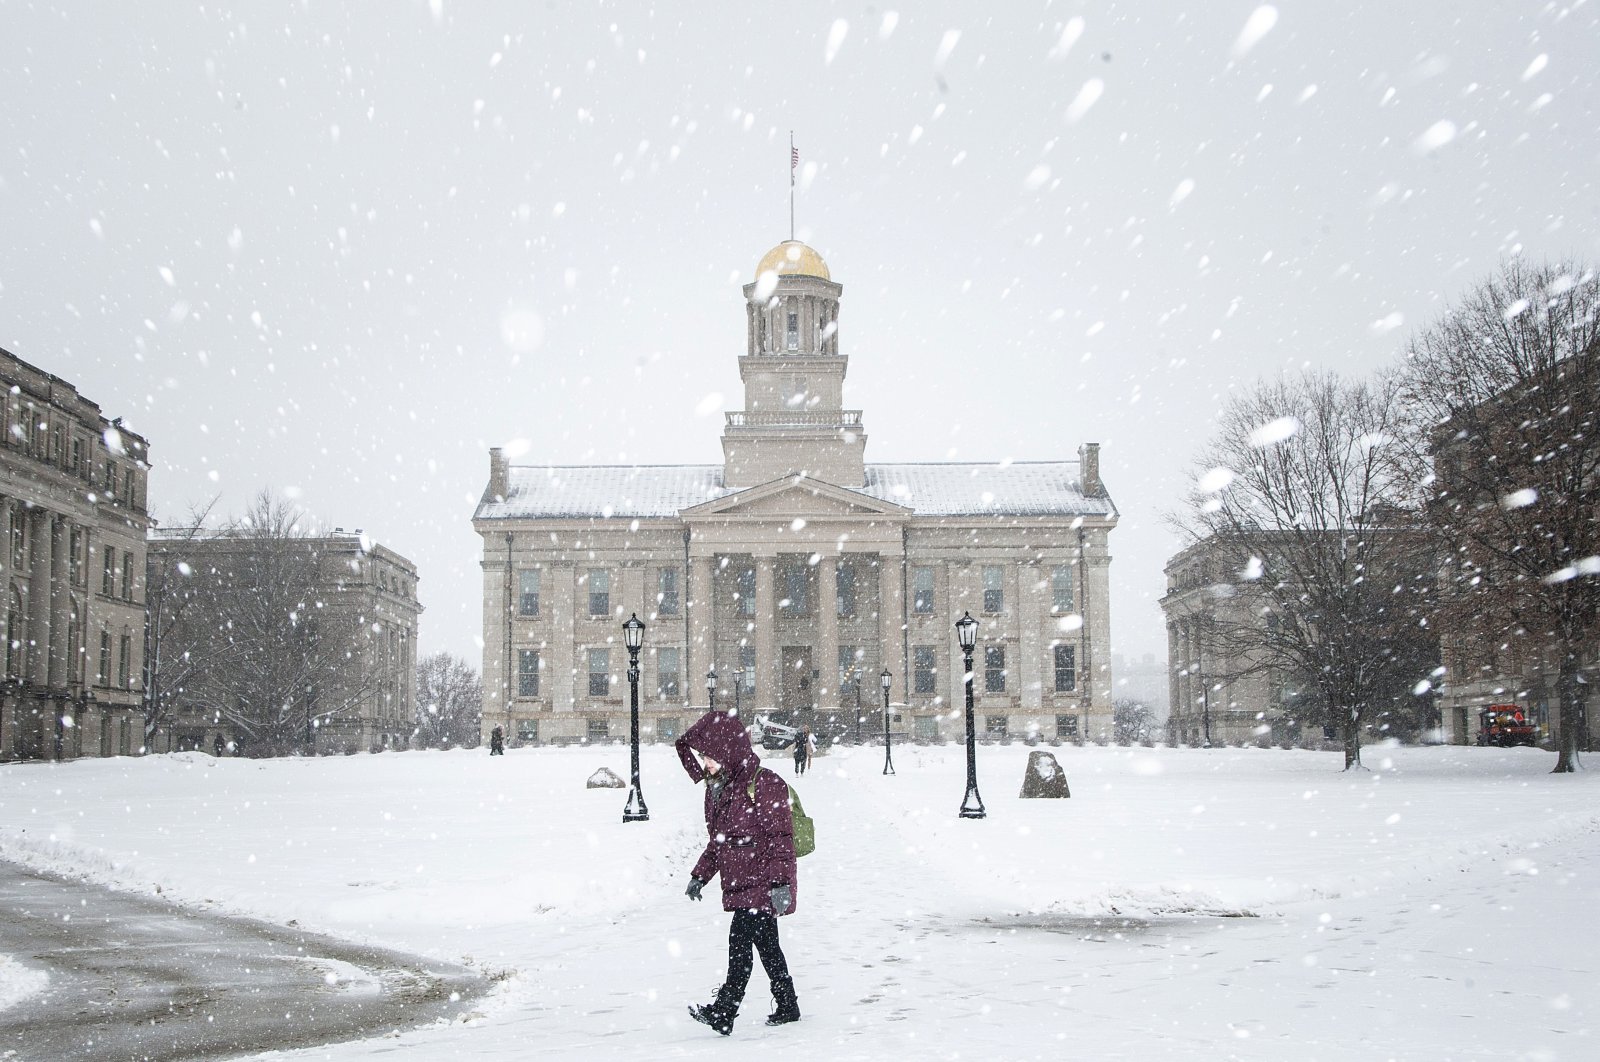 A person walks past the Old Capitol Building as snow falls during a winter storm warning, in Iowa City, Iowa, Jan. 14, 2022. (Joseph Cress/Iowa City Press-Citizen via AP)